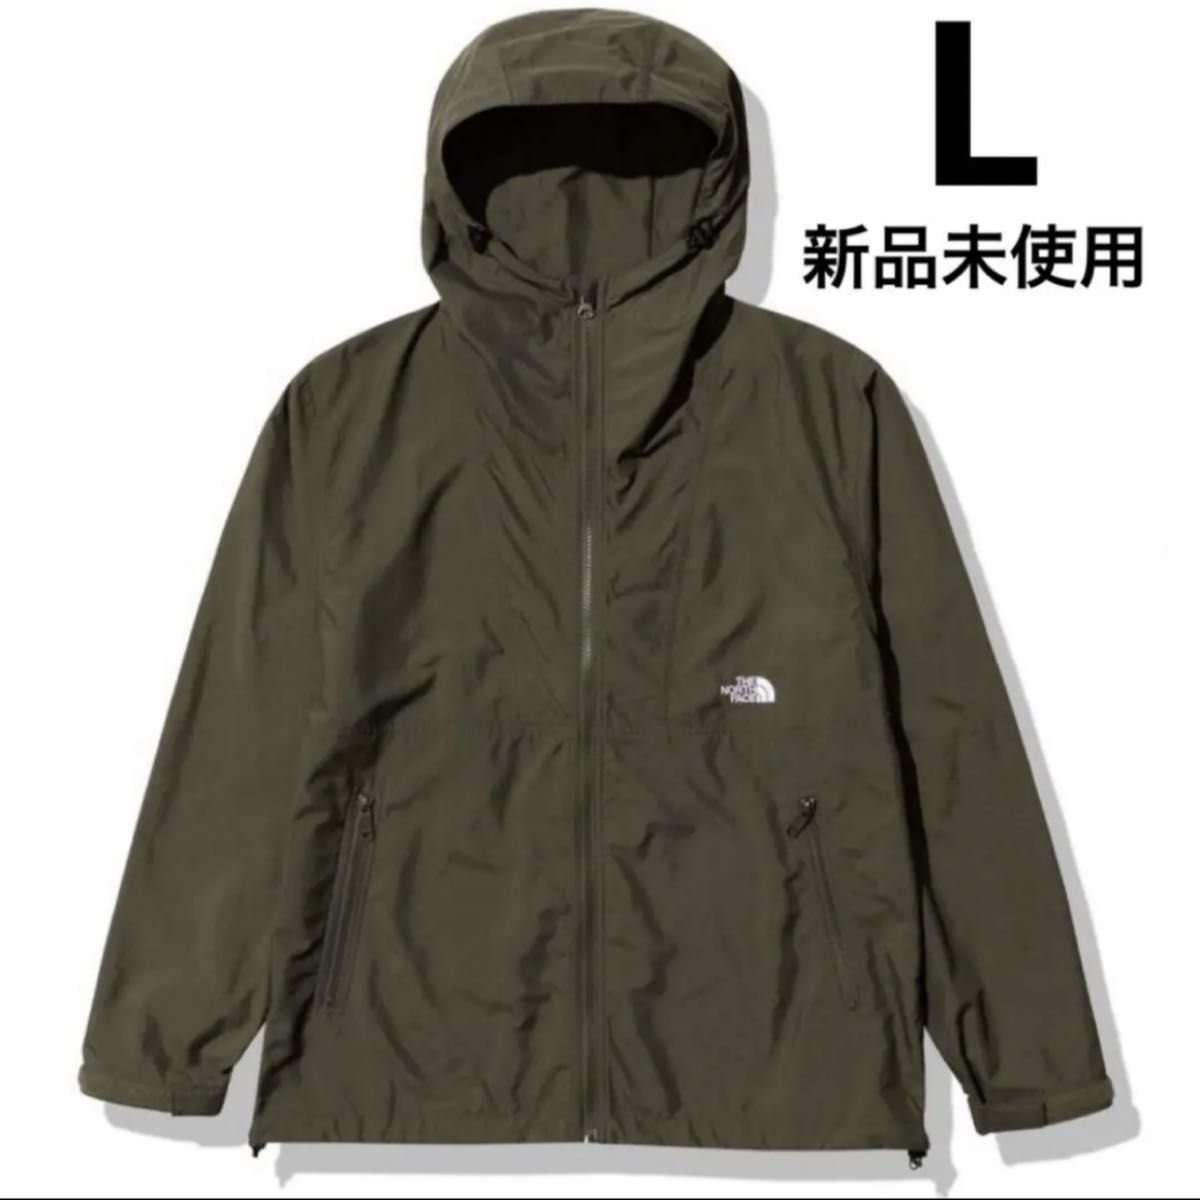 THE NORTH FACE】ザ・ノースフェイス / コンパクトジャケット（キッズ